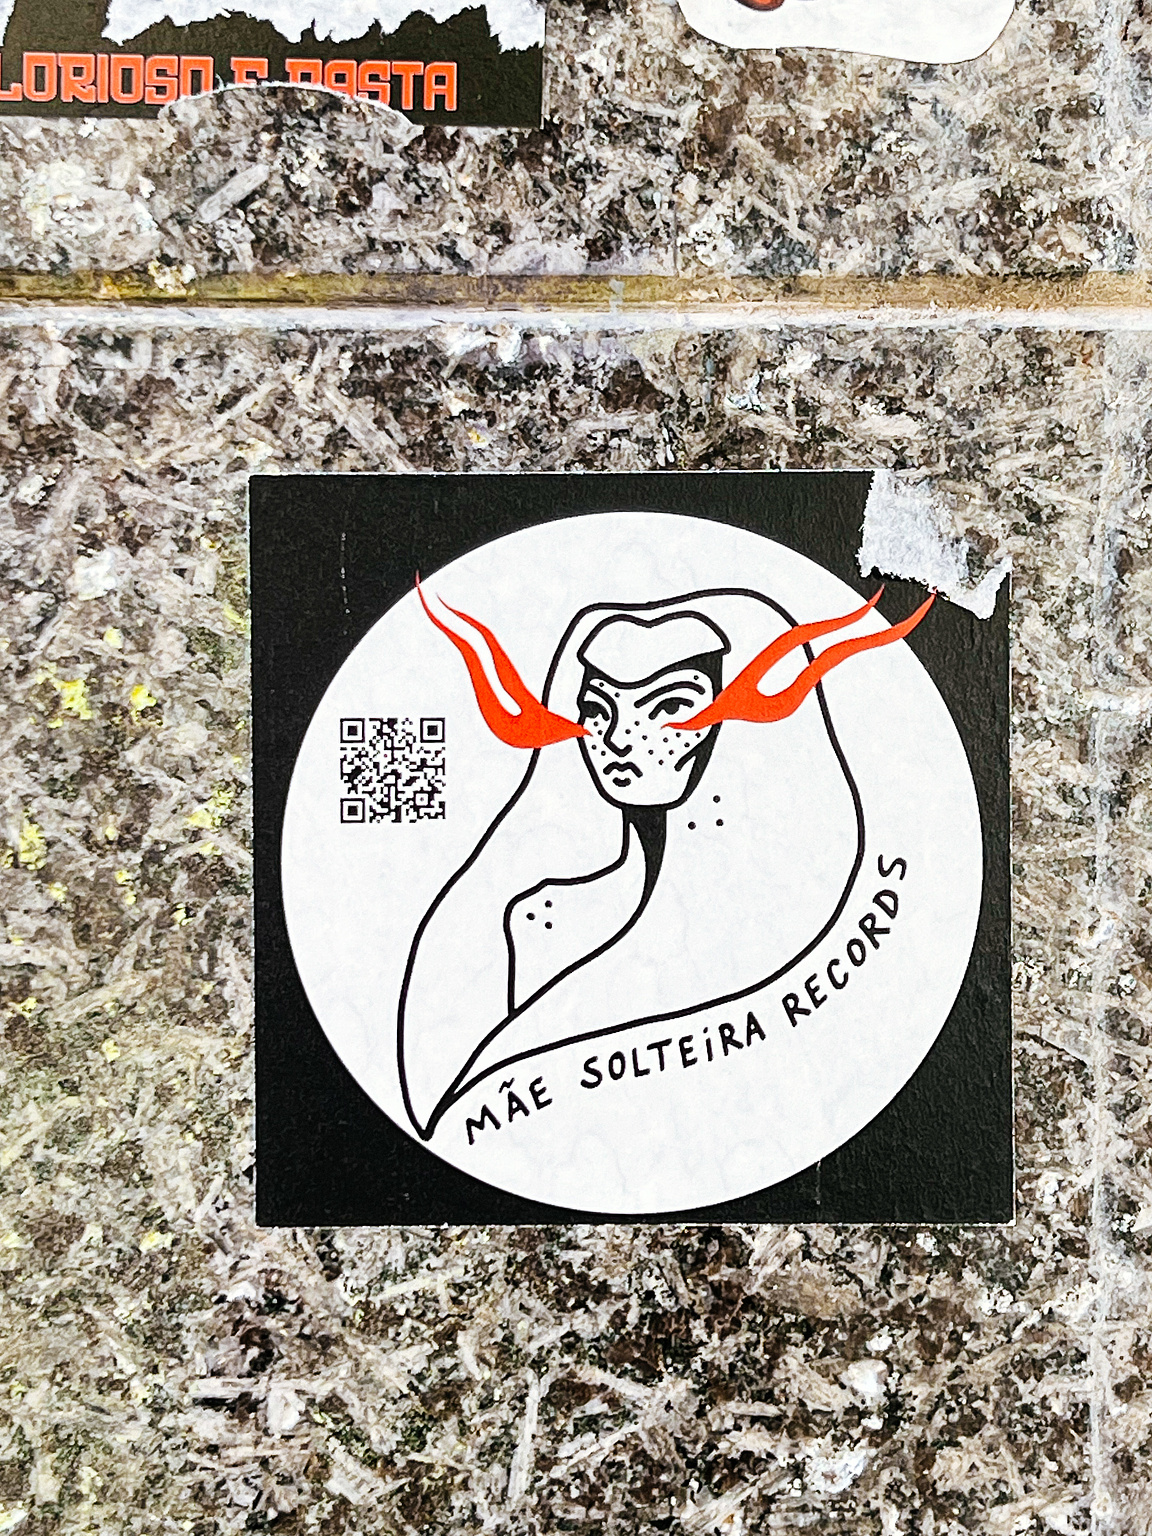 A sticker with a stylized female face and flowing hair, above the text "MÃE SOLTEIRA RECORDS," attached to a speckled wall.